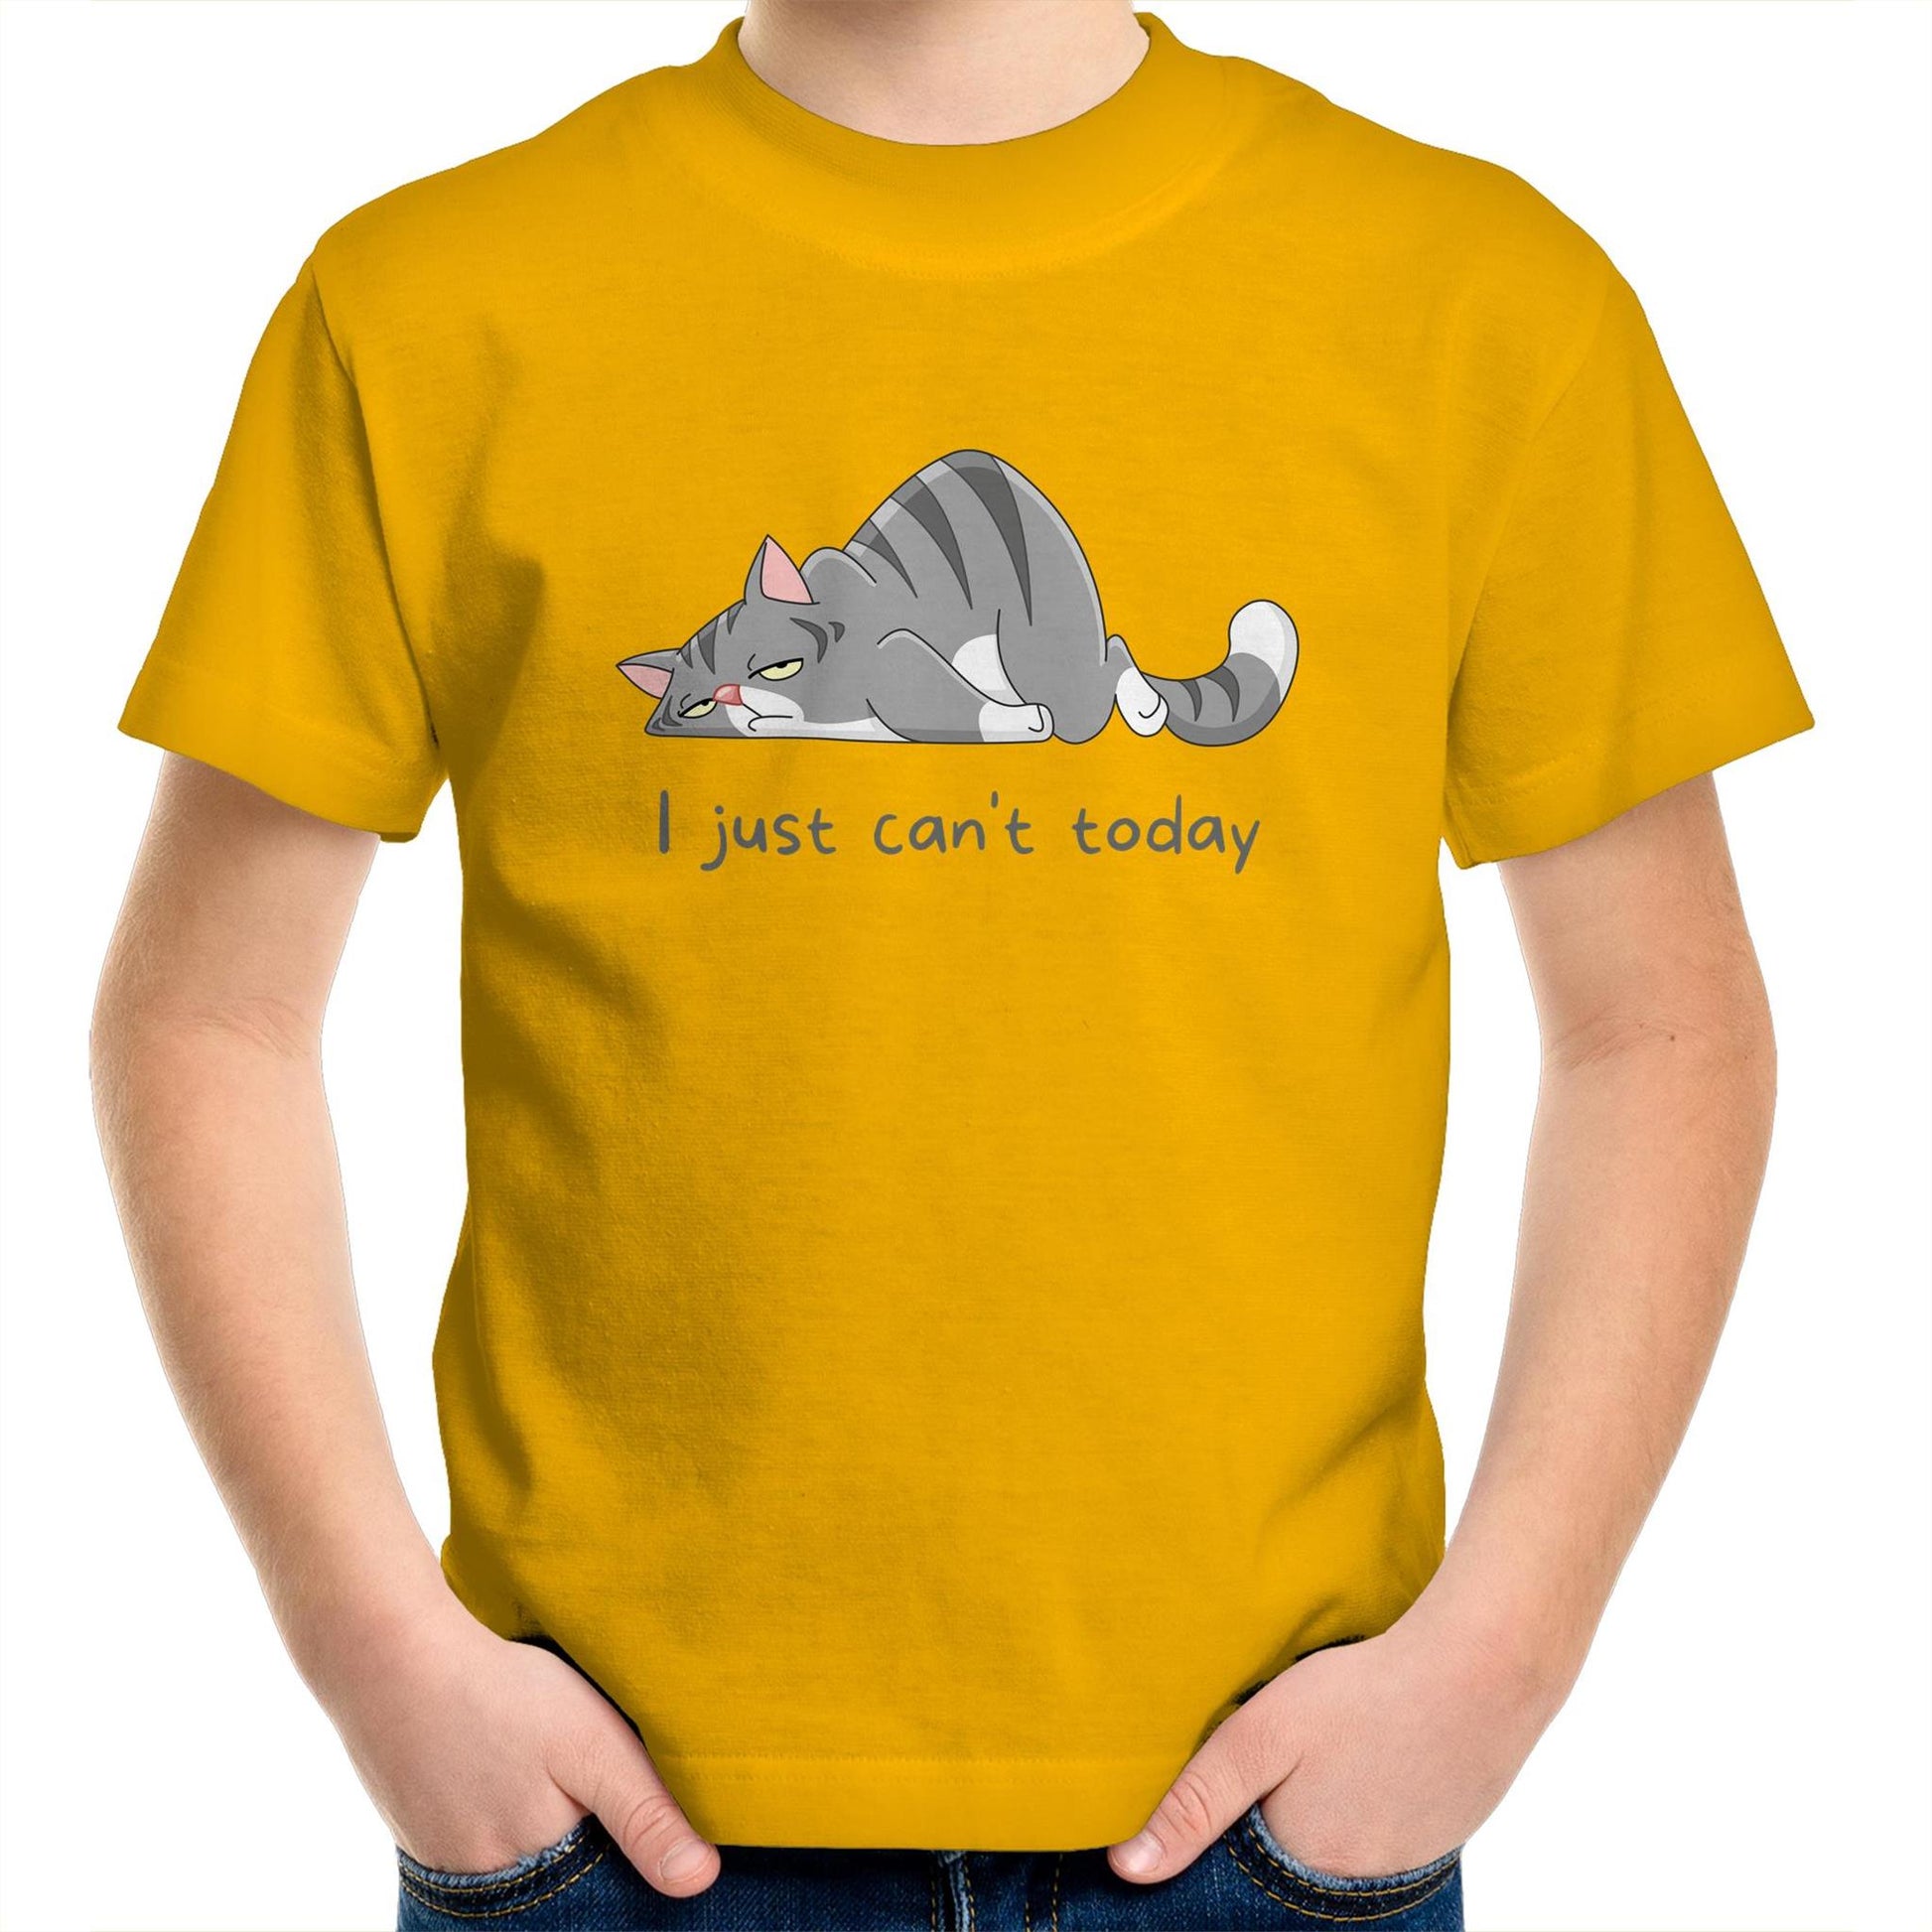 Cat, I Just Can't Today - Kids Youth Crew T-Shirt Gold Kids Youth T-shirt animal